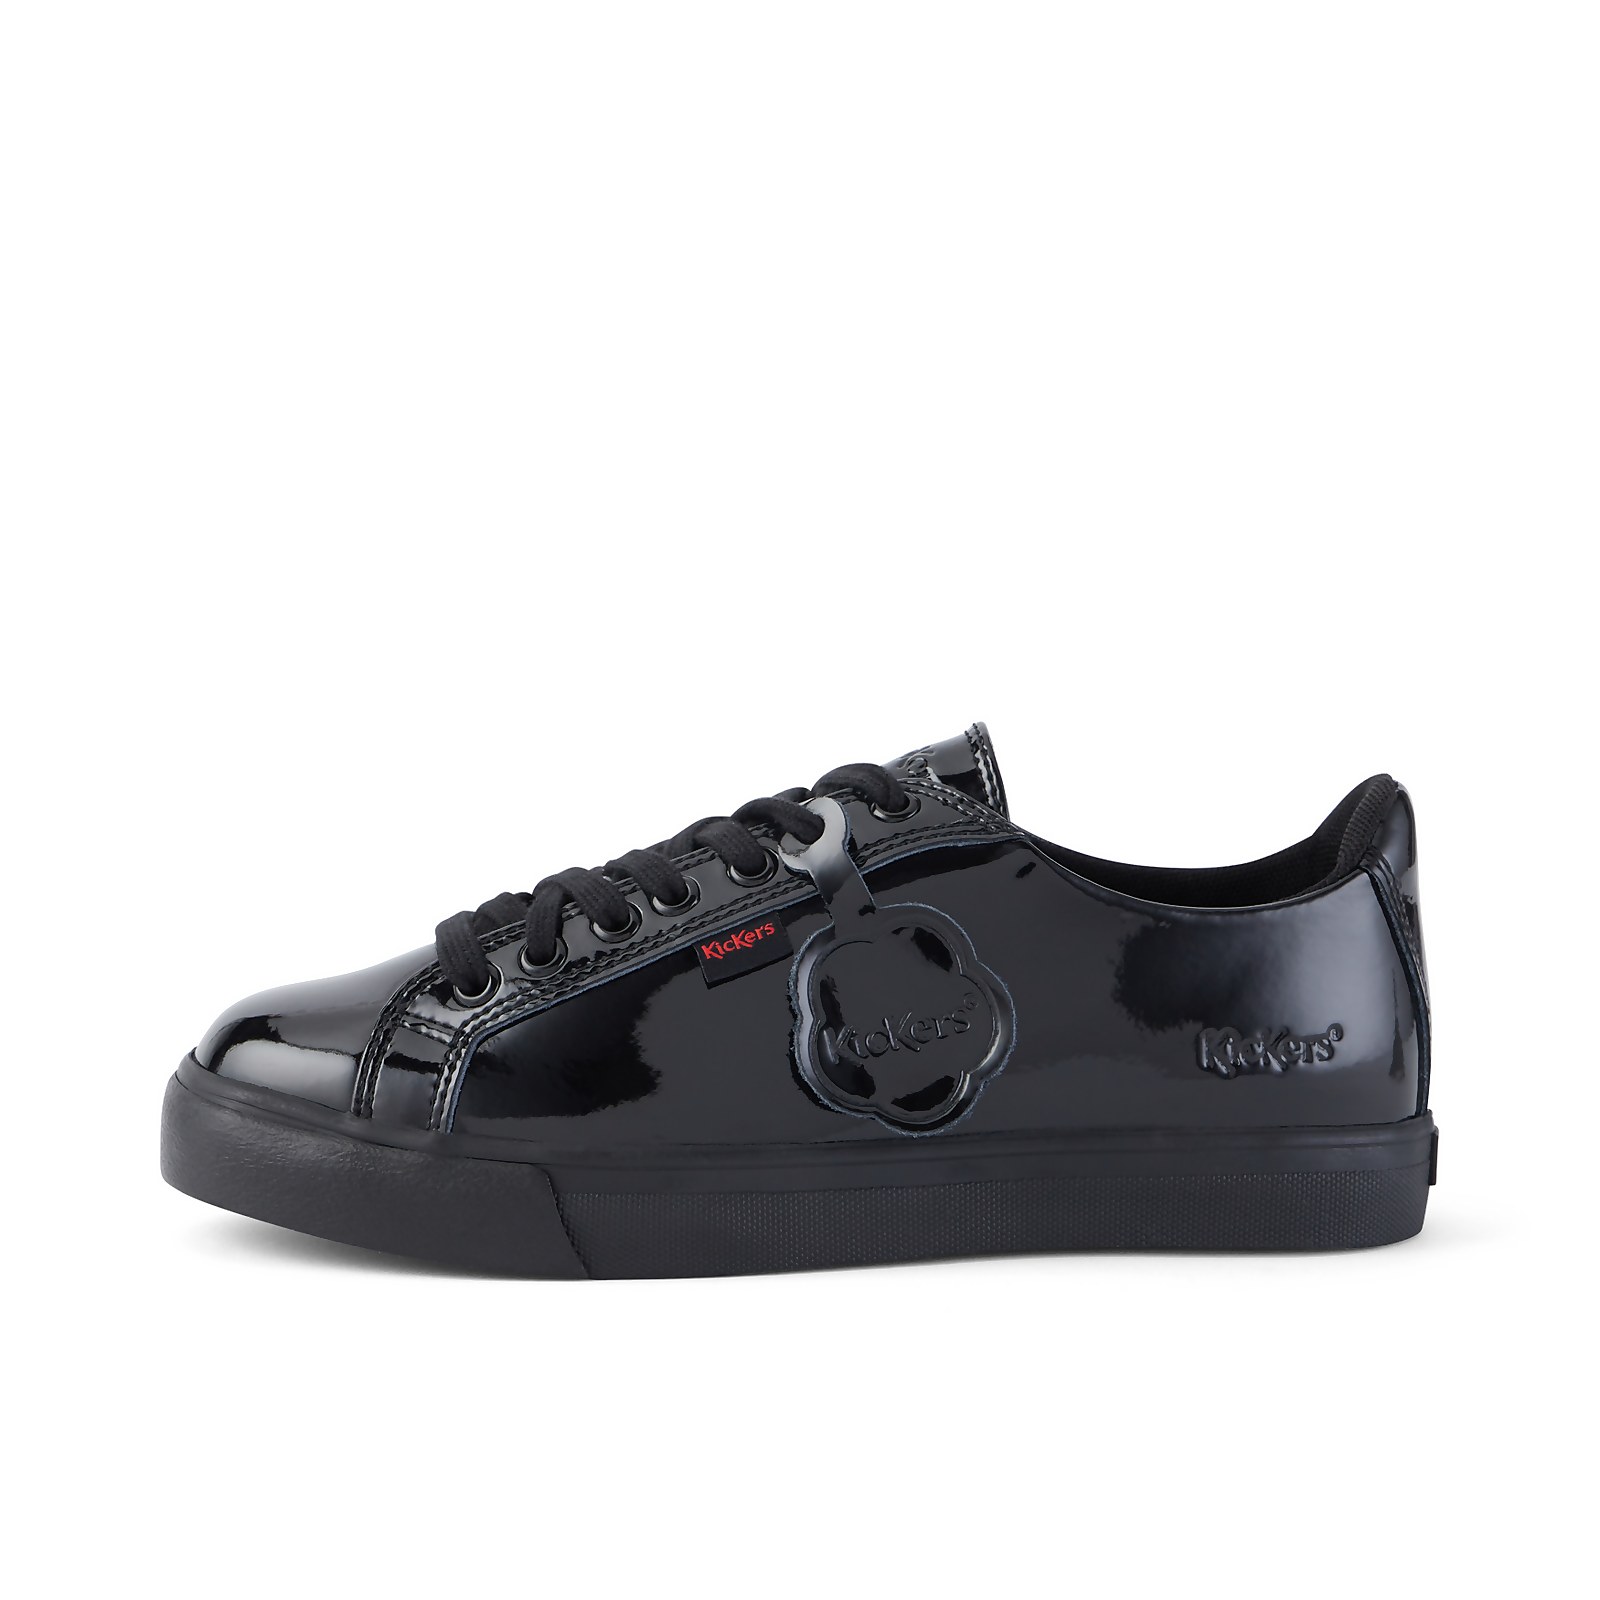 Adult Womens Tovni Lacer Patent Leather Black